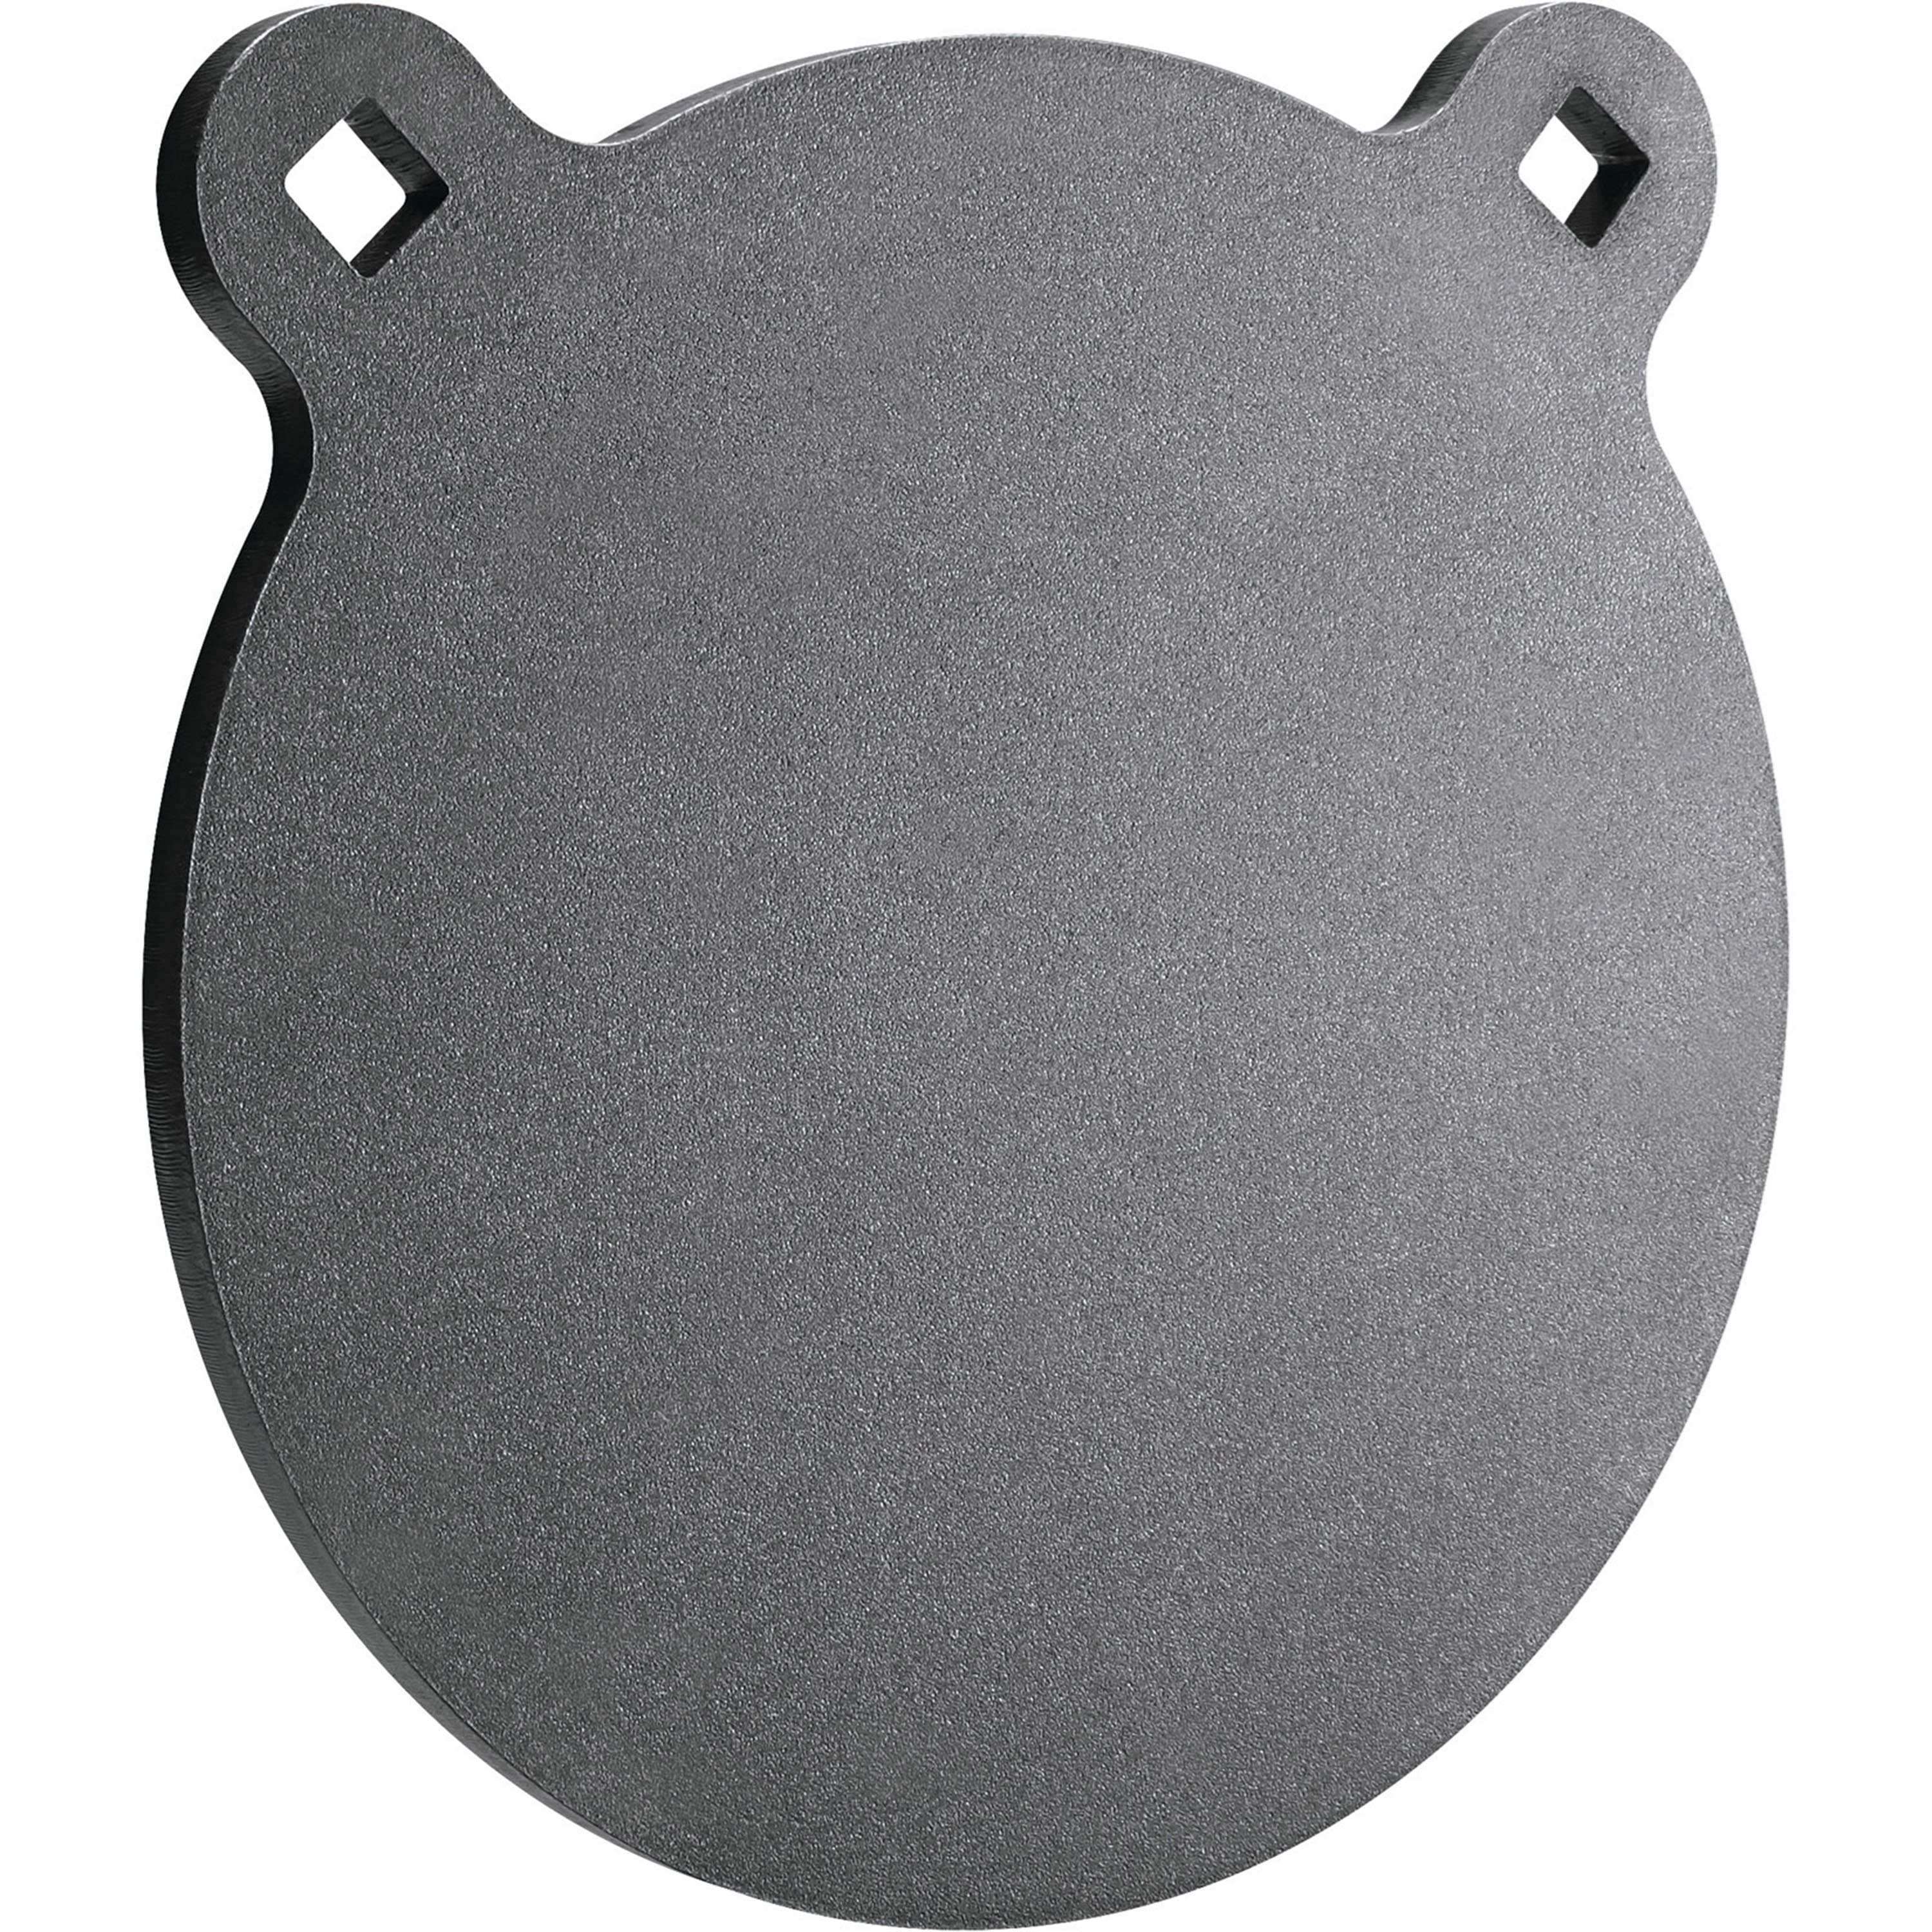 1/2" AR500 4" x 4" Gong Steel Target Practice Plate 1ct High Caliber 